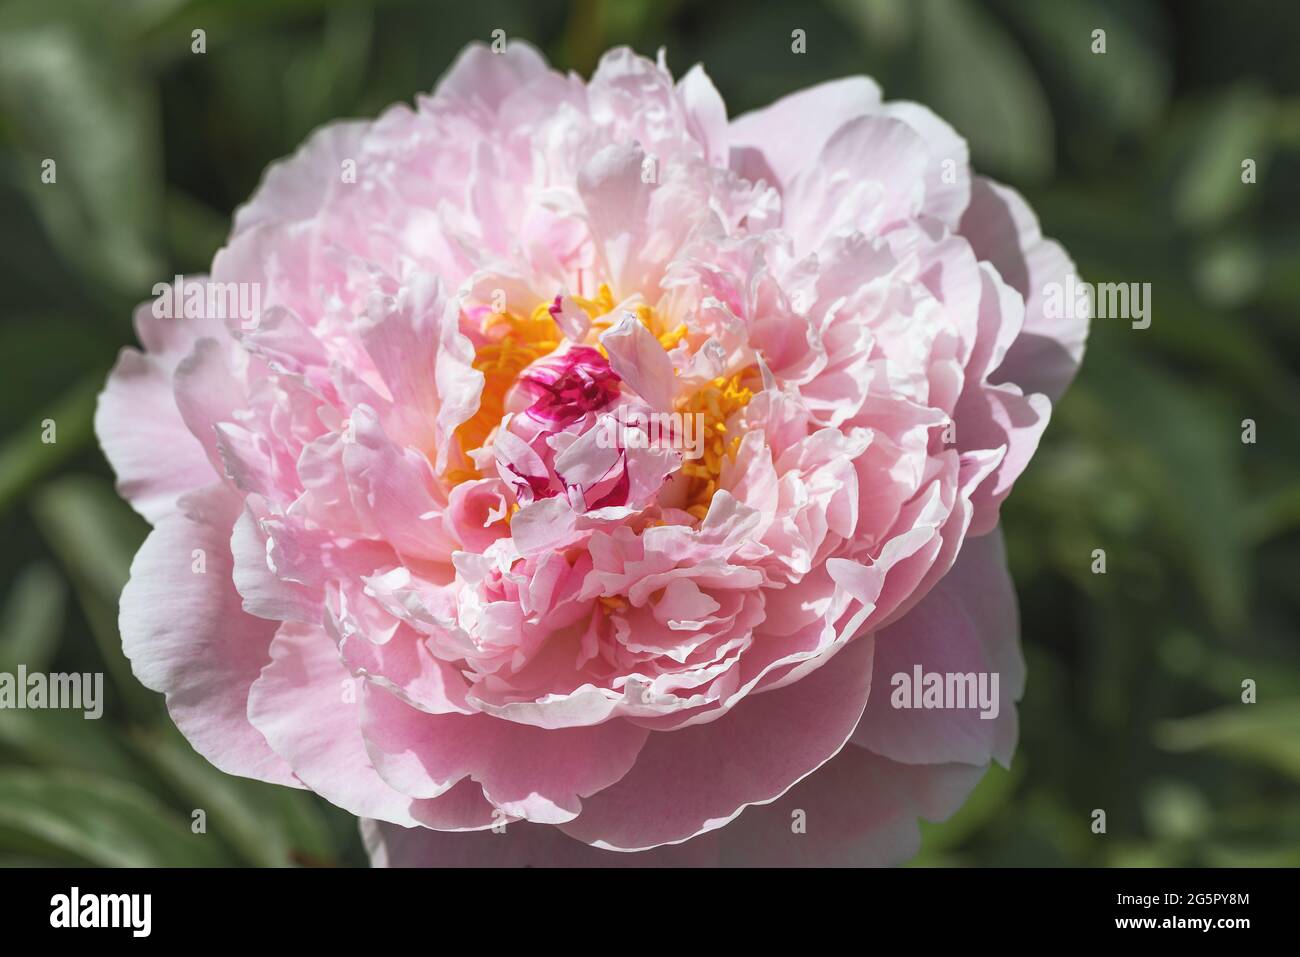 Blush Queen peony is milky-flowered with giant double-shaped flowers. They are creamy white with delicate light pink hues. Stock Photo